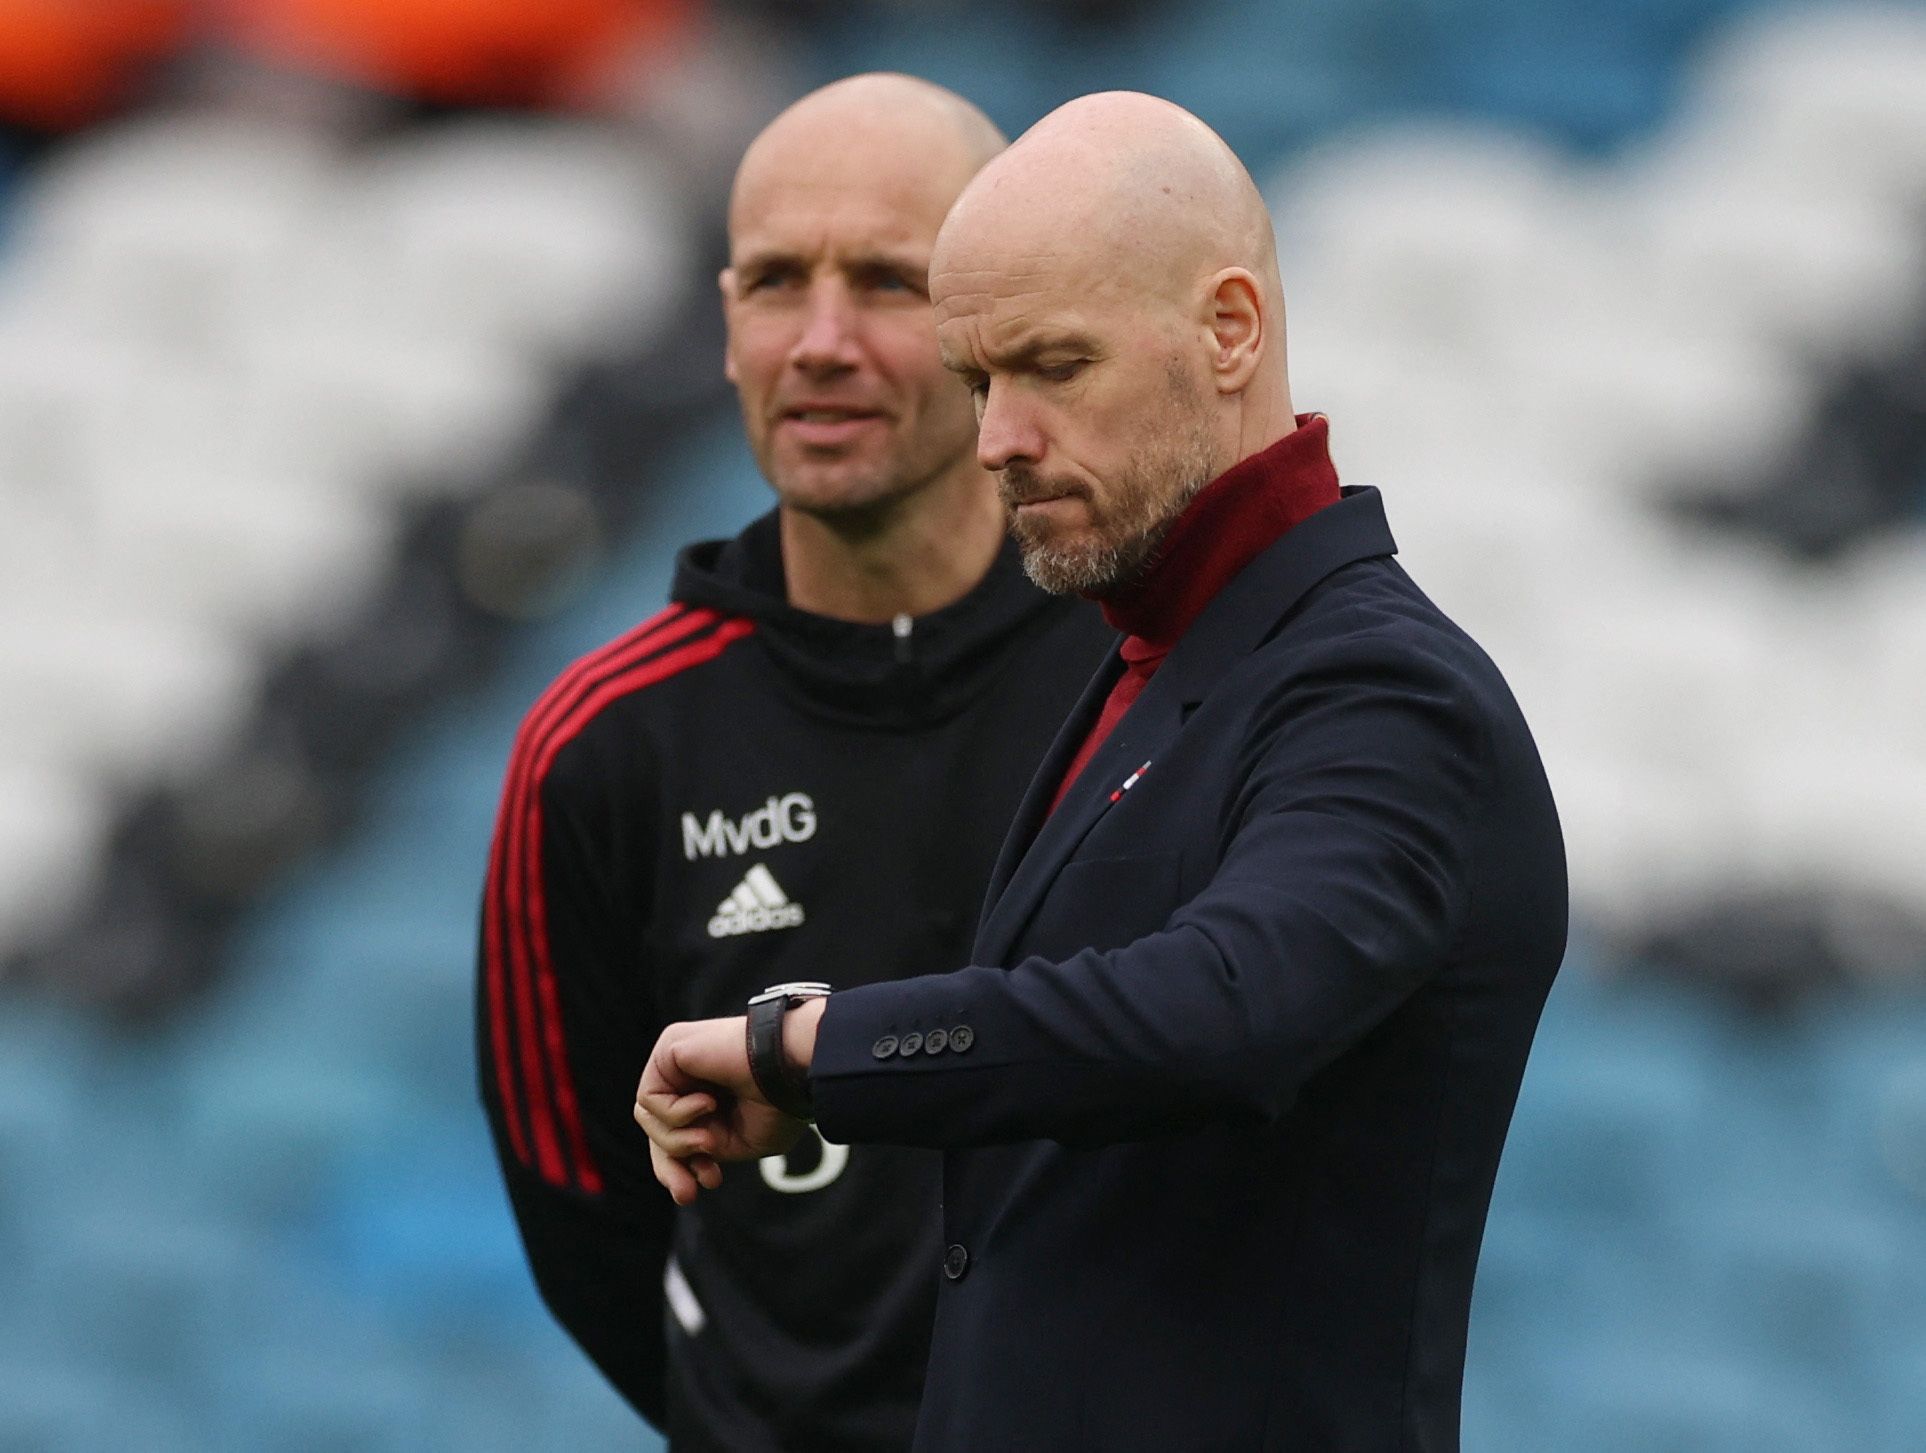 Manchester United manager Erik ten Hag checking the time